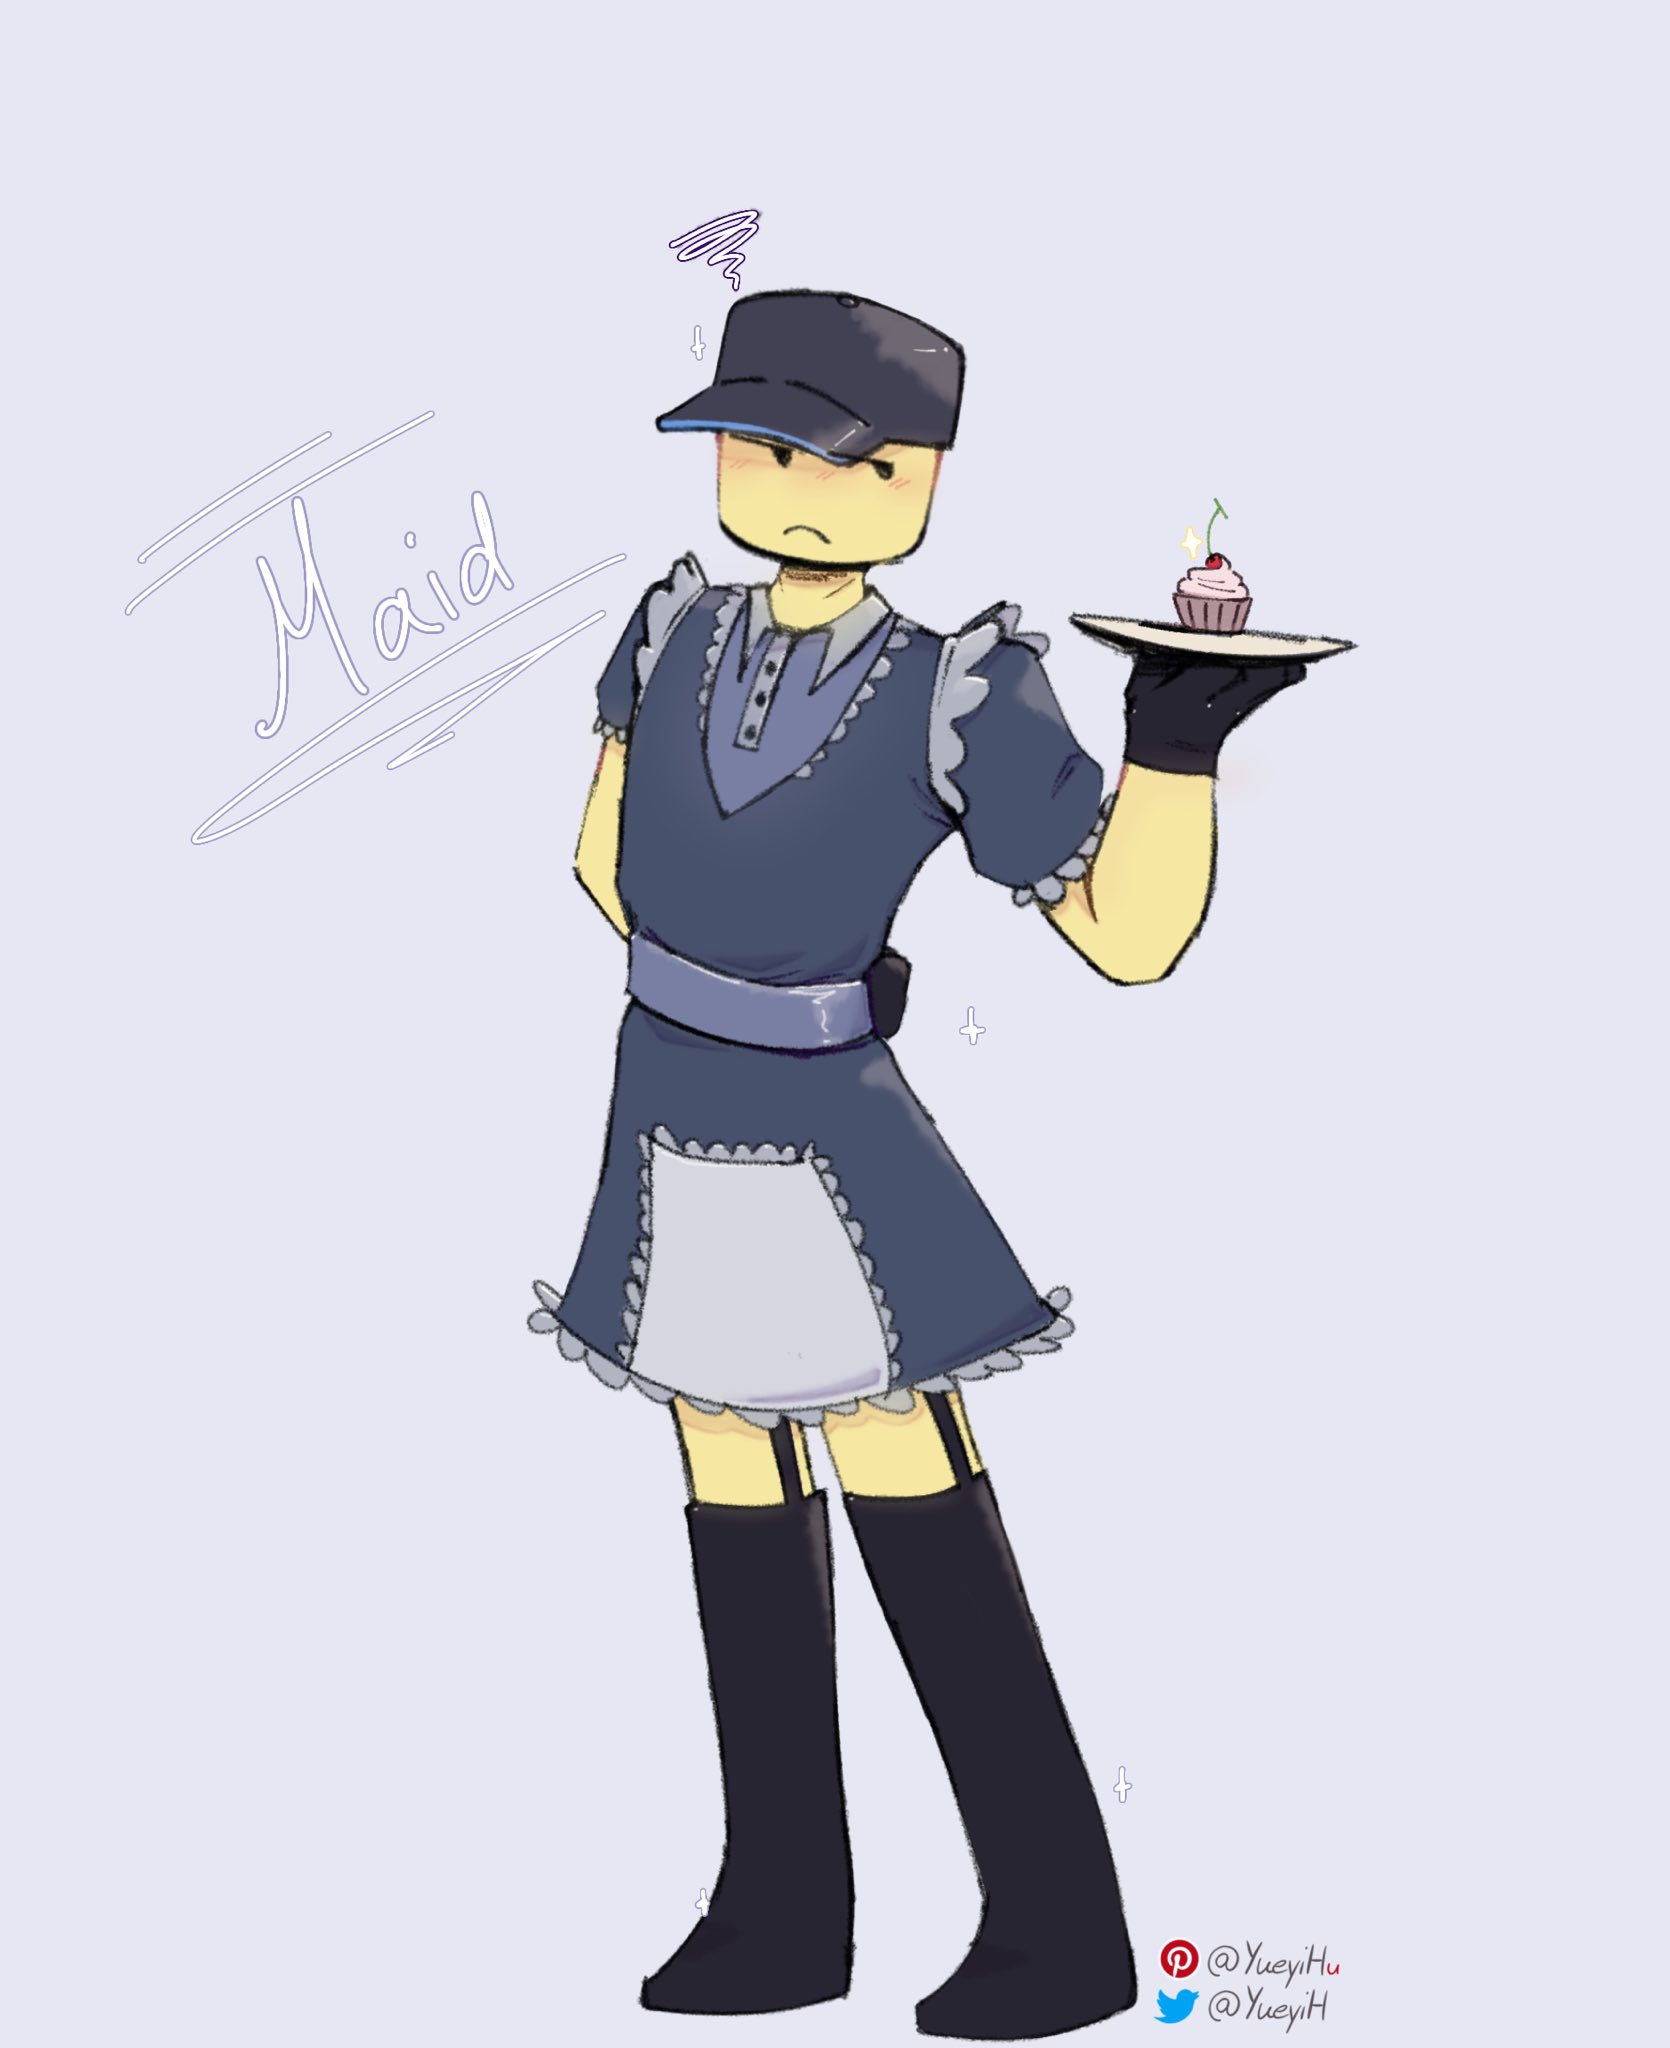 i did drawing of rebel from game called evade. #roblox #robloxart